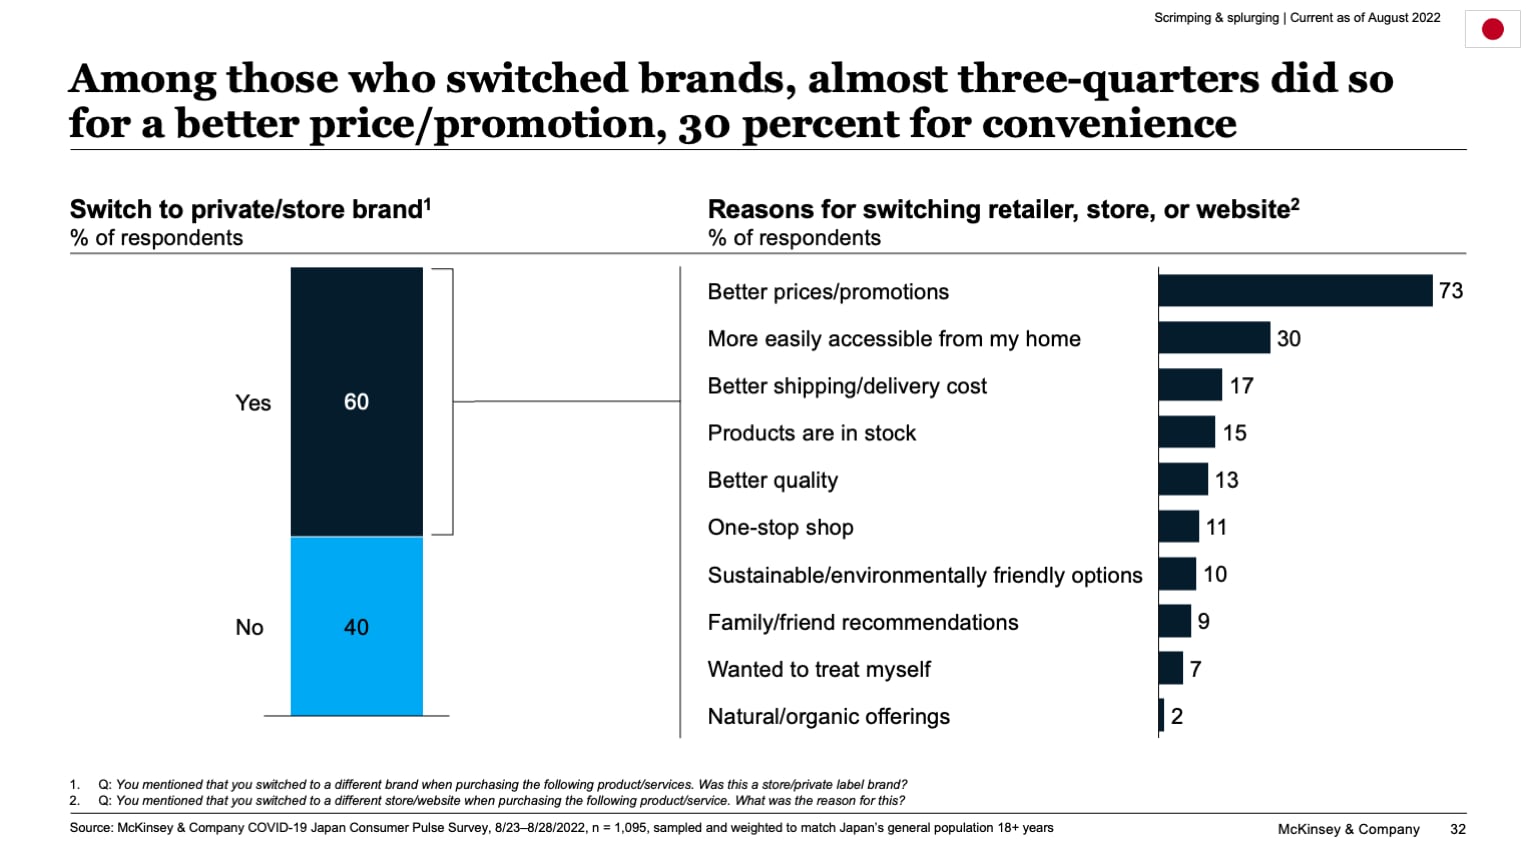 Among those who switched brands, almost three-quarters did so for a better price/promotion, 30 percent for convenience